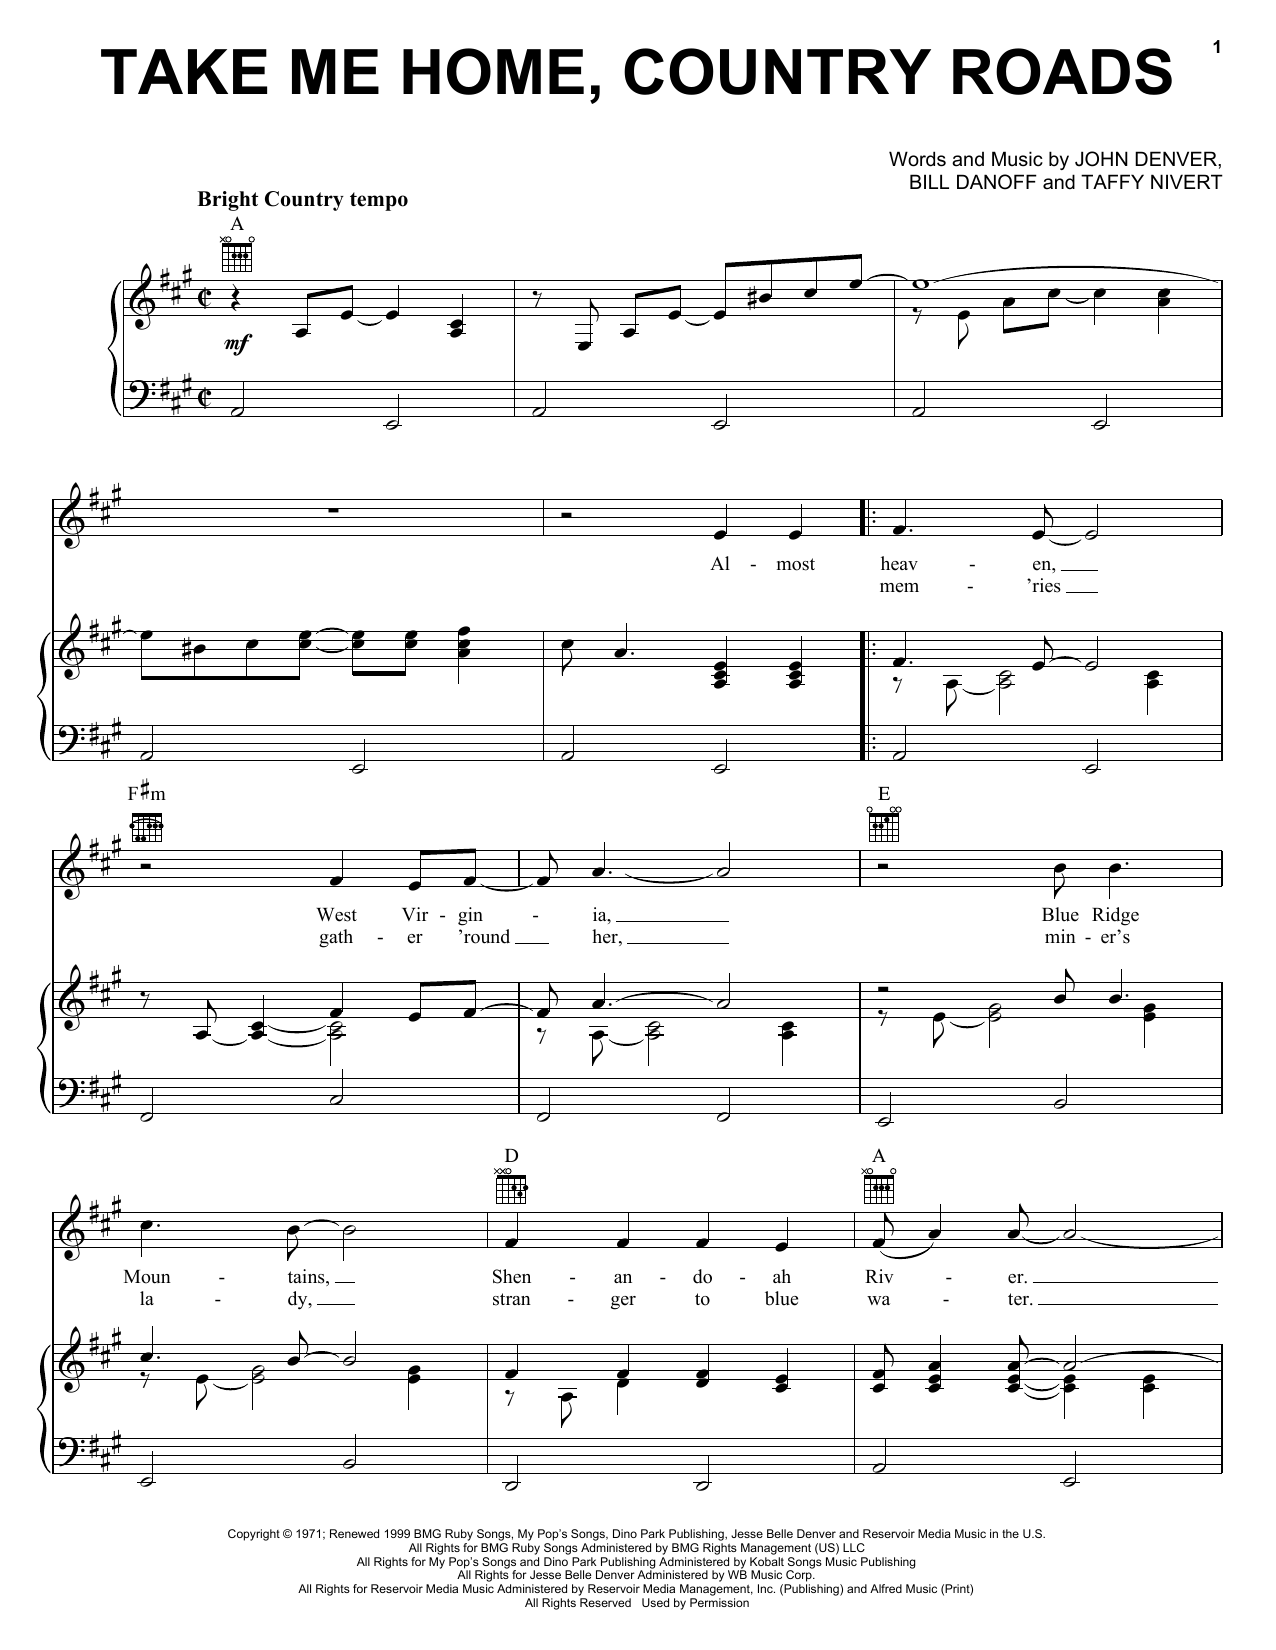 Take Me Home, Country Roads Sheet Music by John Denver for Piano/Vocal